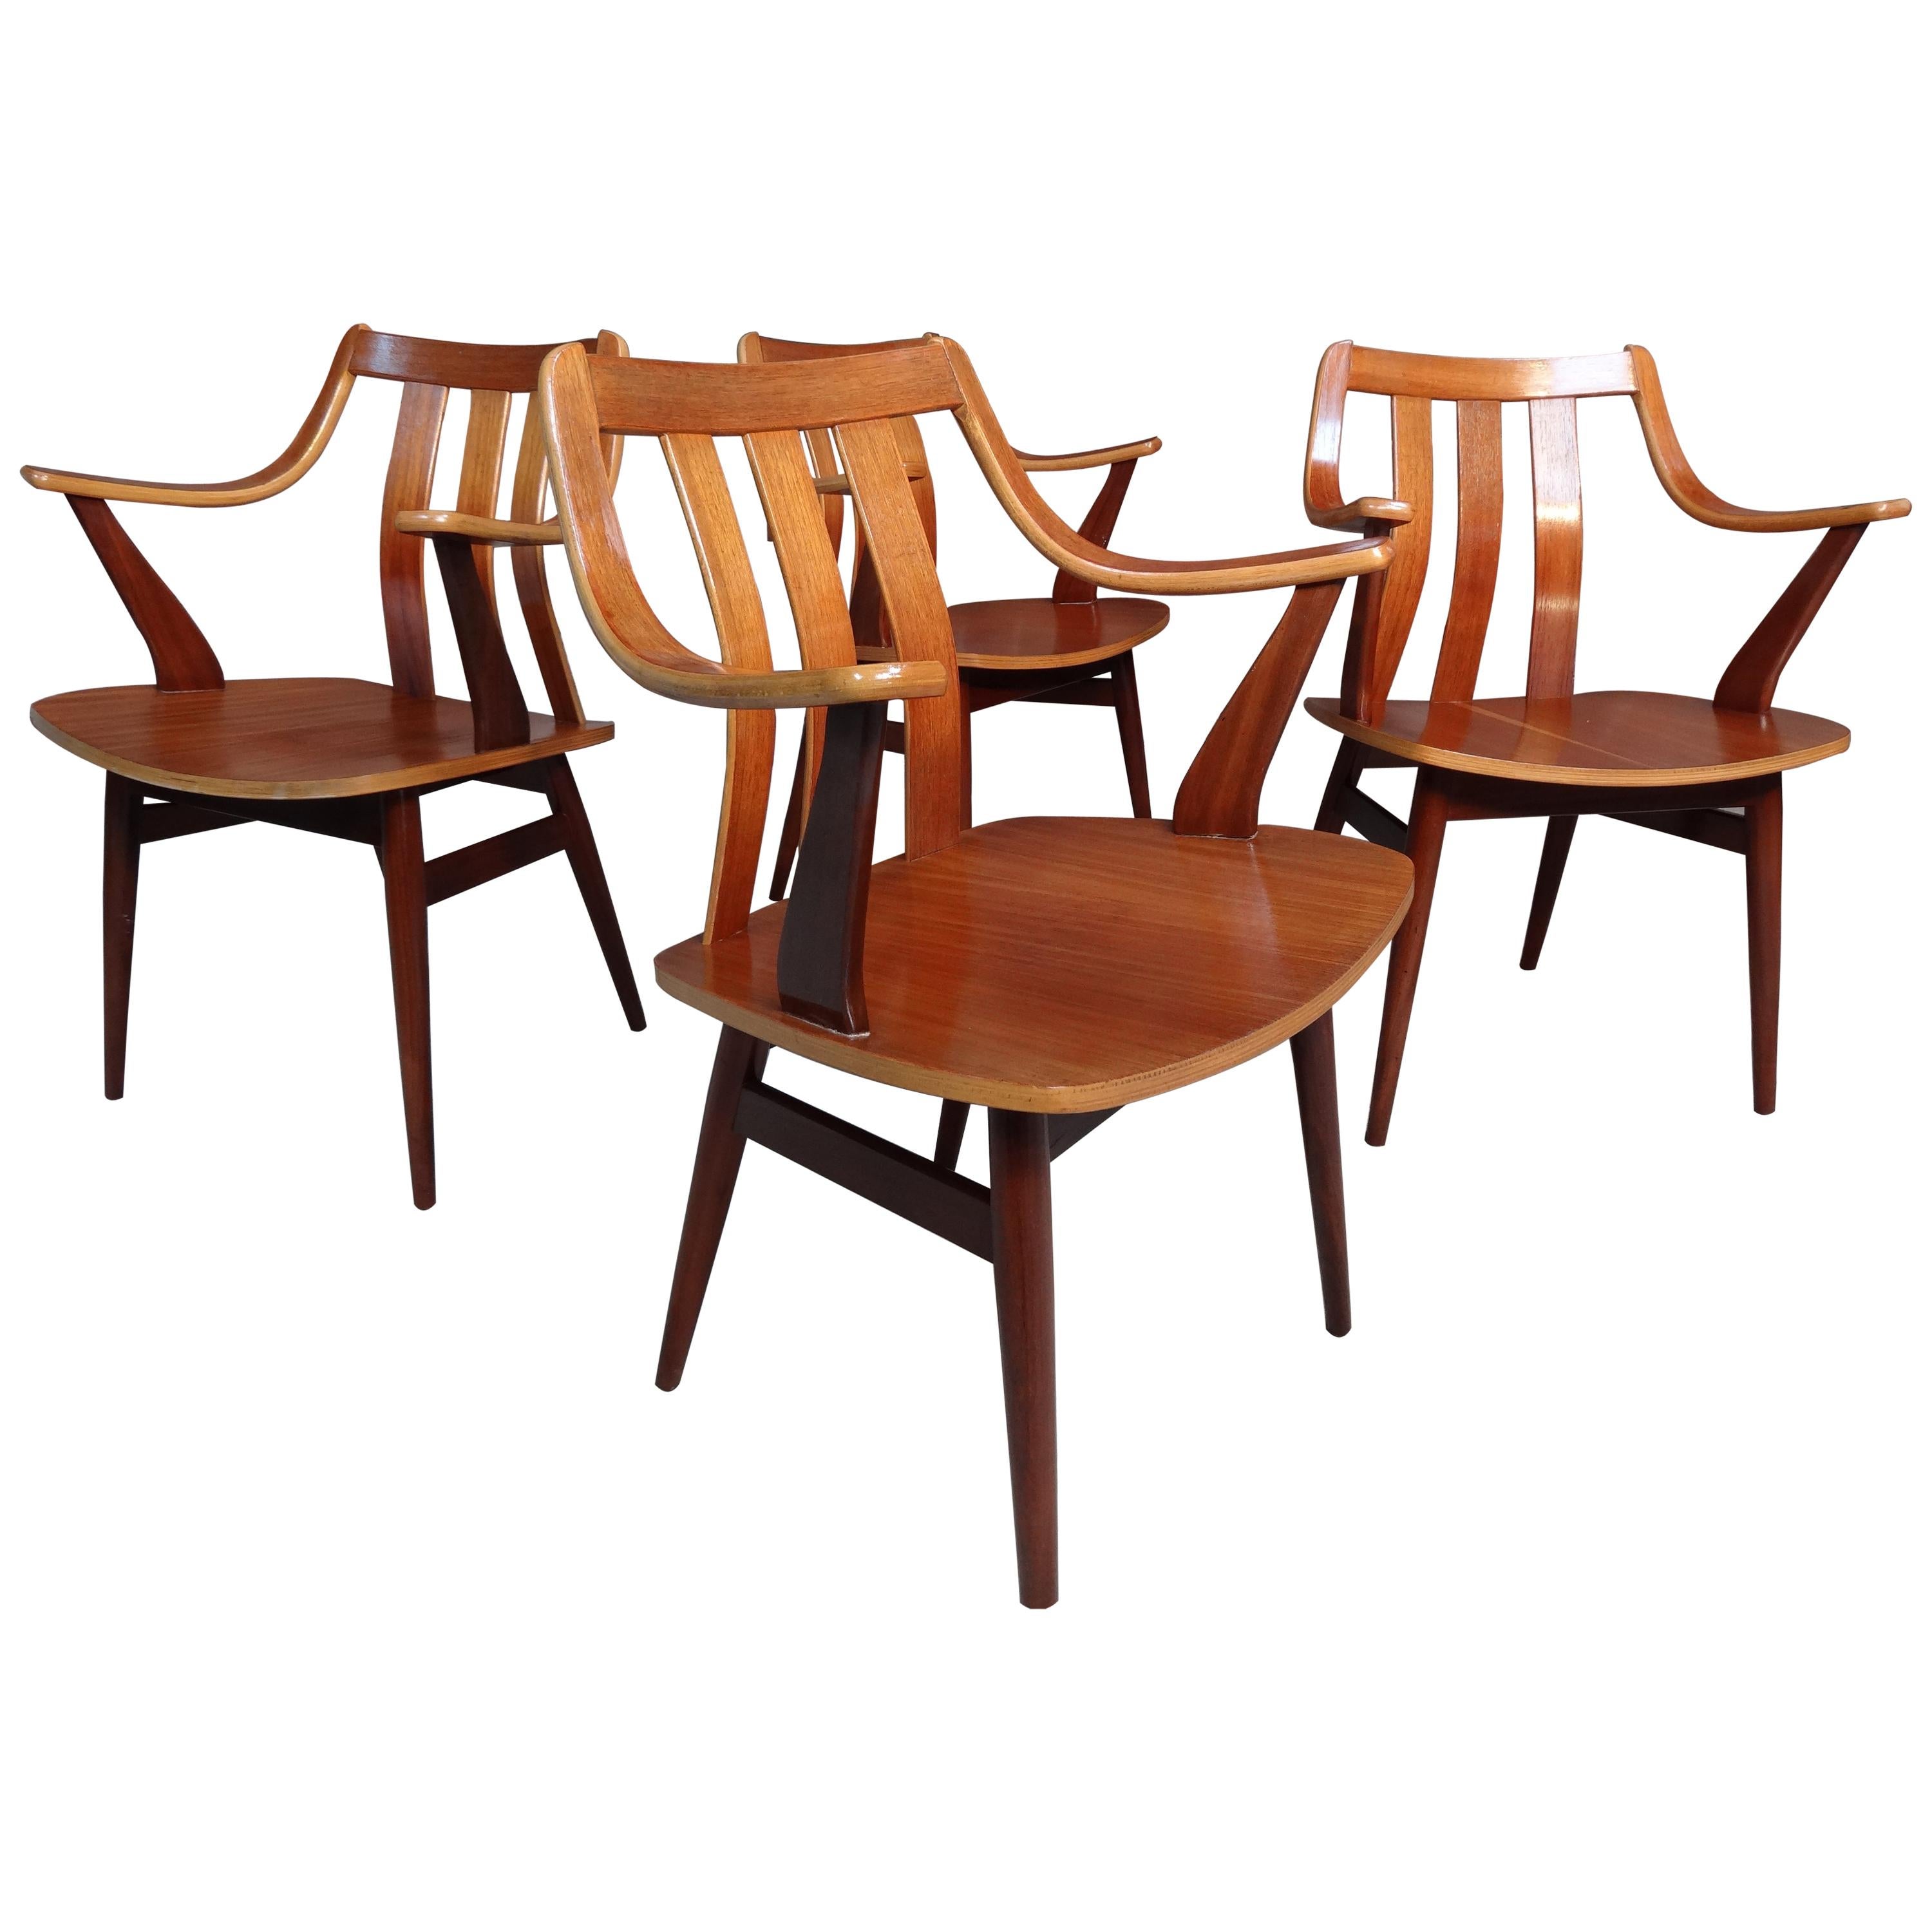 Stunning Set of 4 Vintage Retro 1960's Organic Teak Dining Chairs For Sale